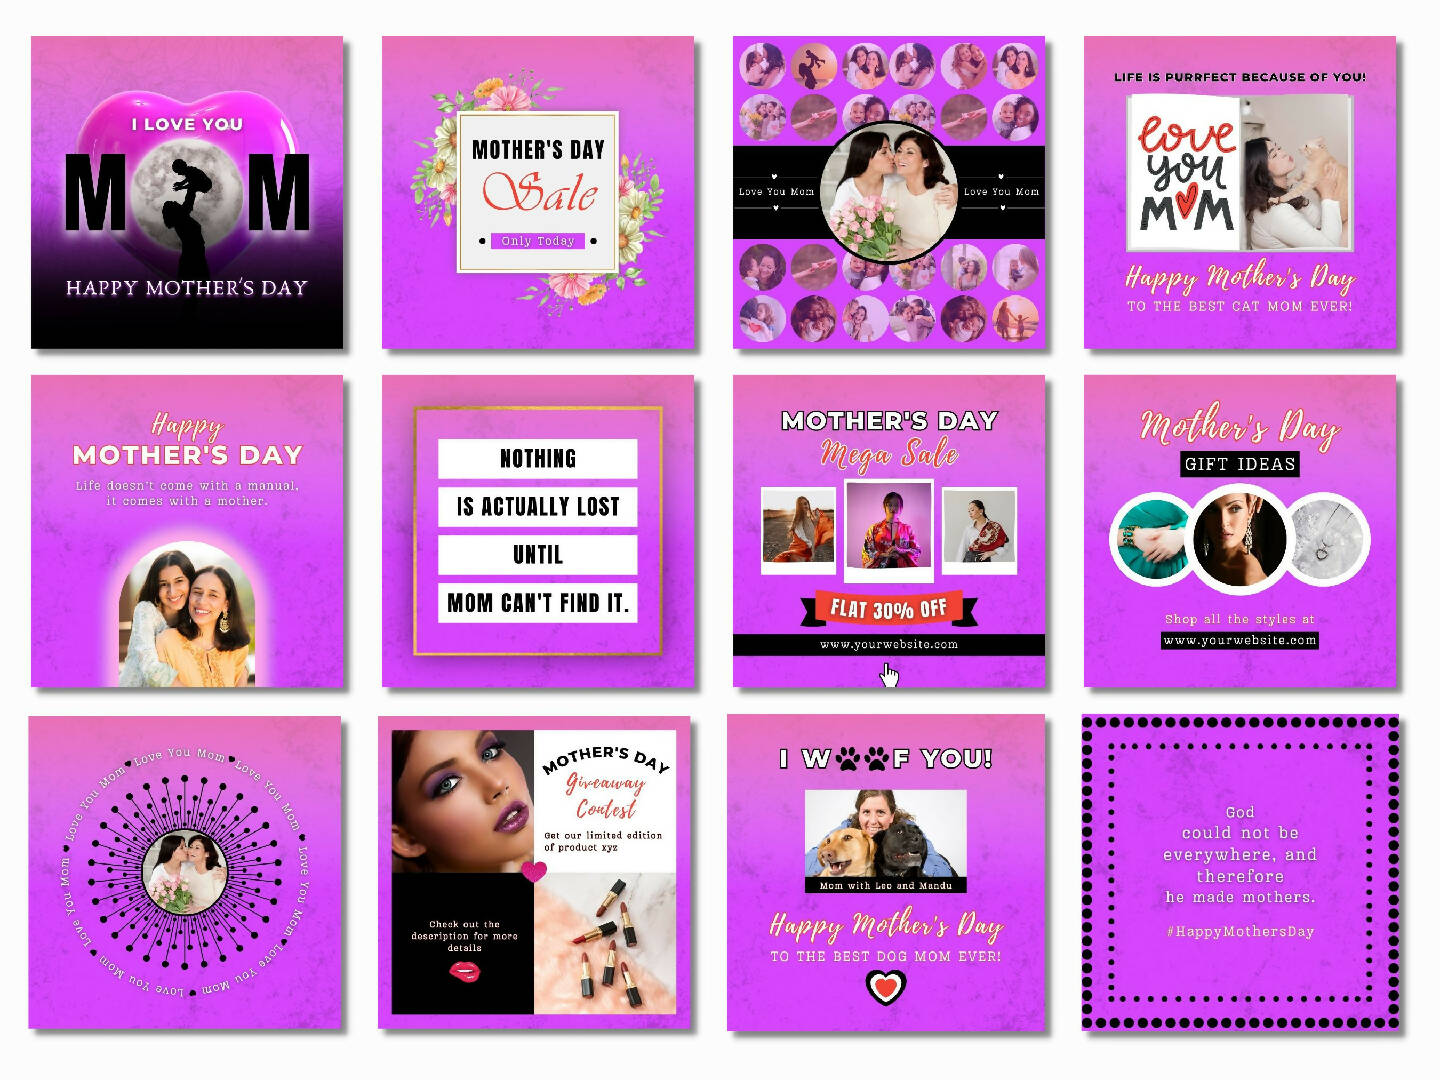 Mother's Day Social Media Posts Template Editable in Canva